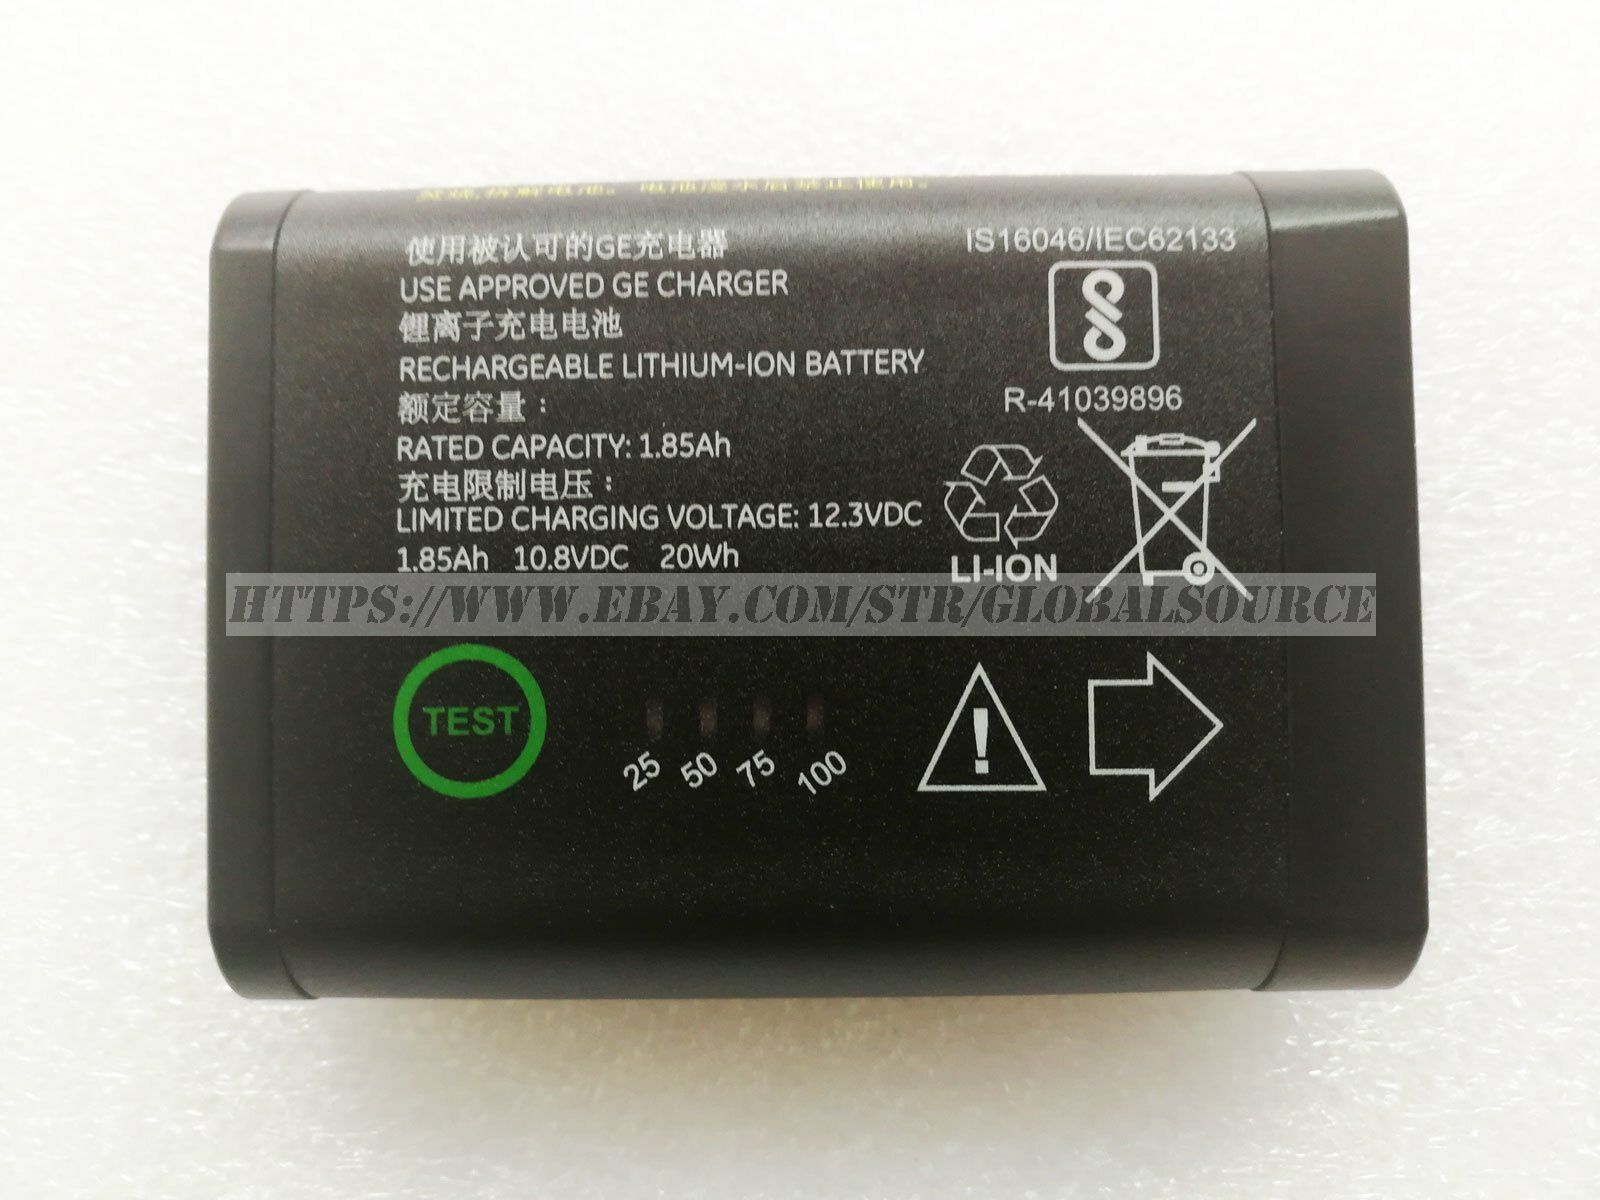 ✅ NEW Genuine U80399 20Wh Battery For GE Healthcare 042219-01507 2016989-003